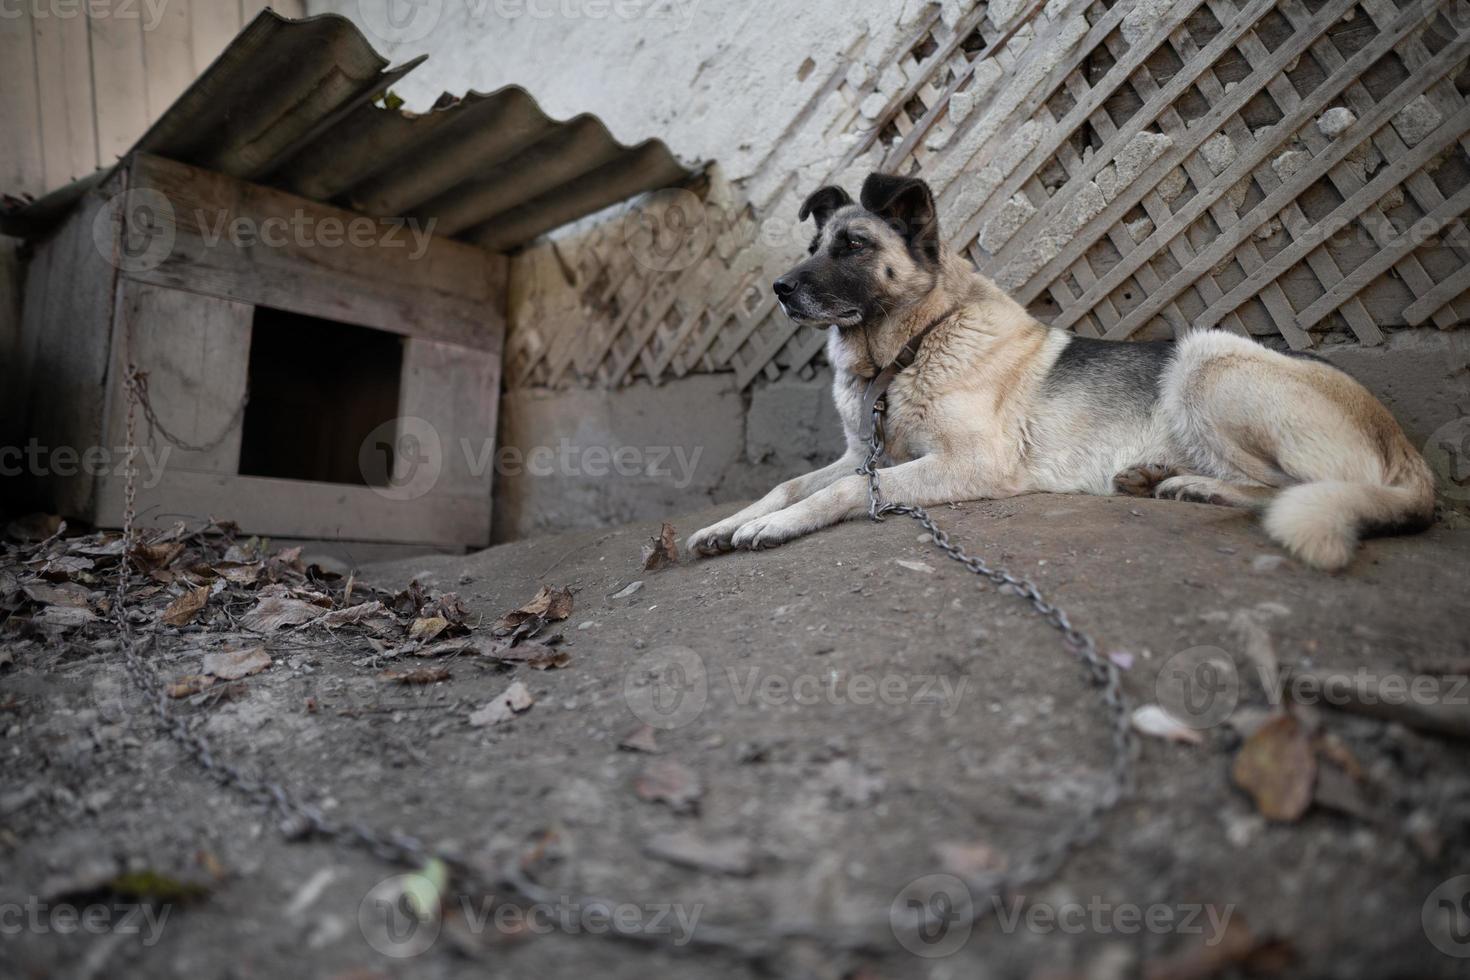 A lonely and sad guard dog on a chain near a dog house outdoors. photo